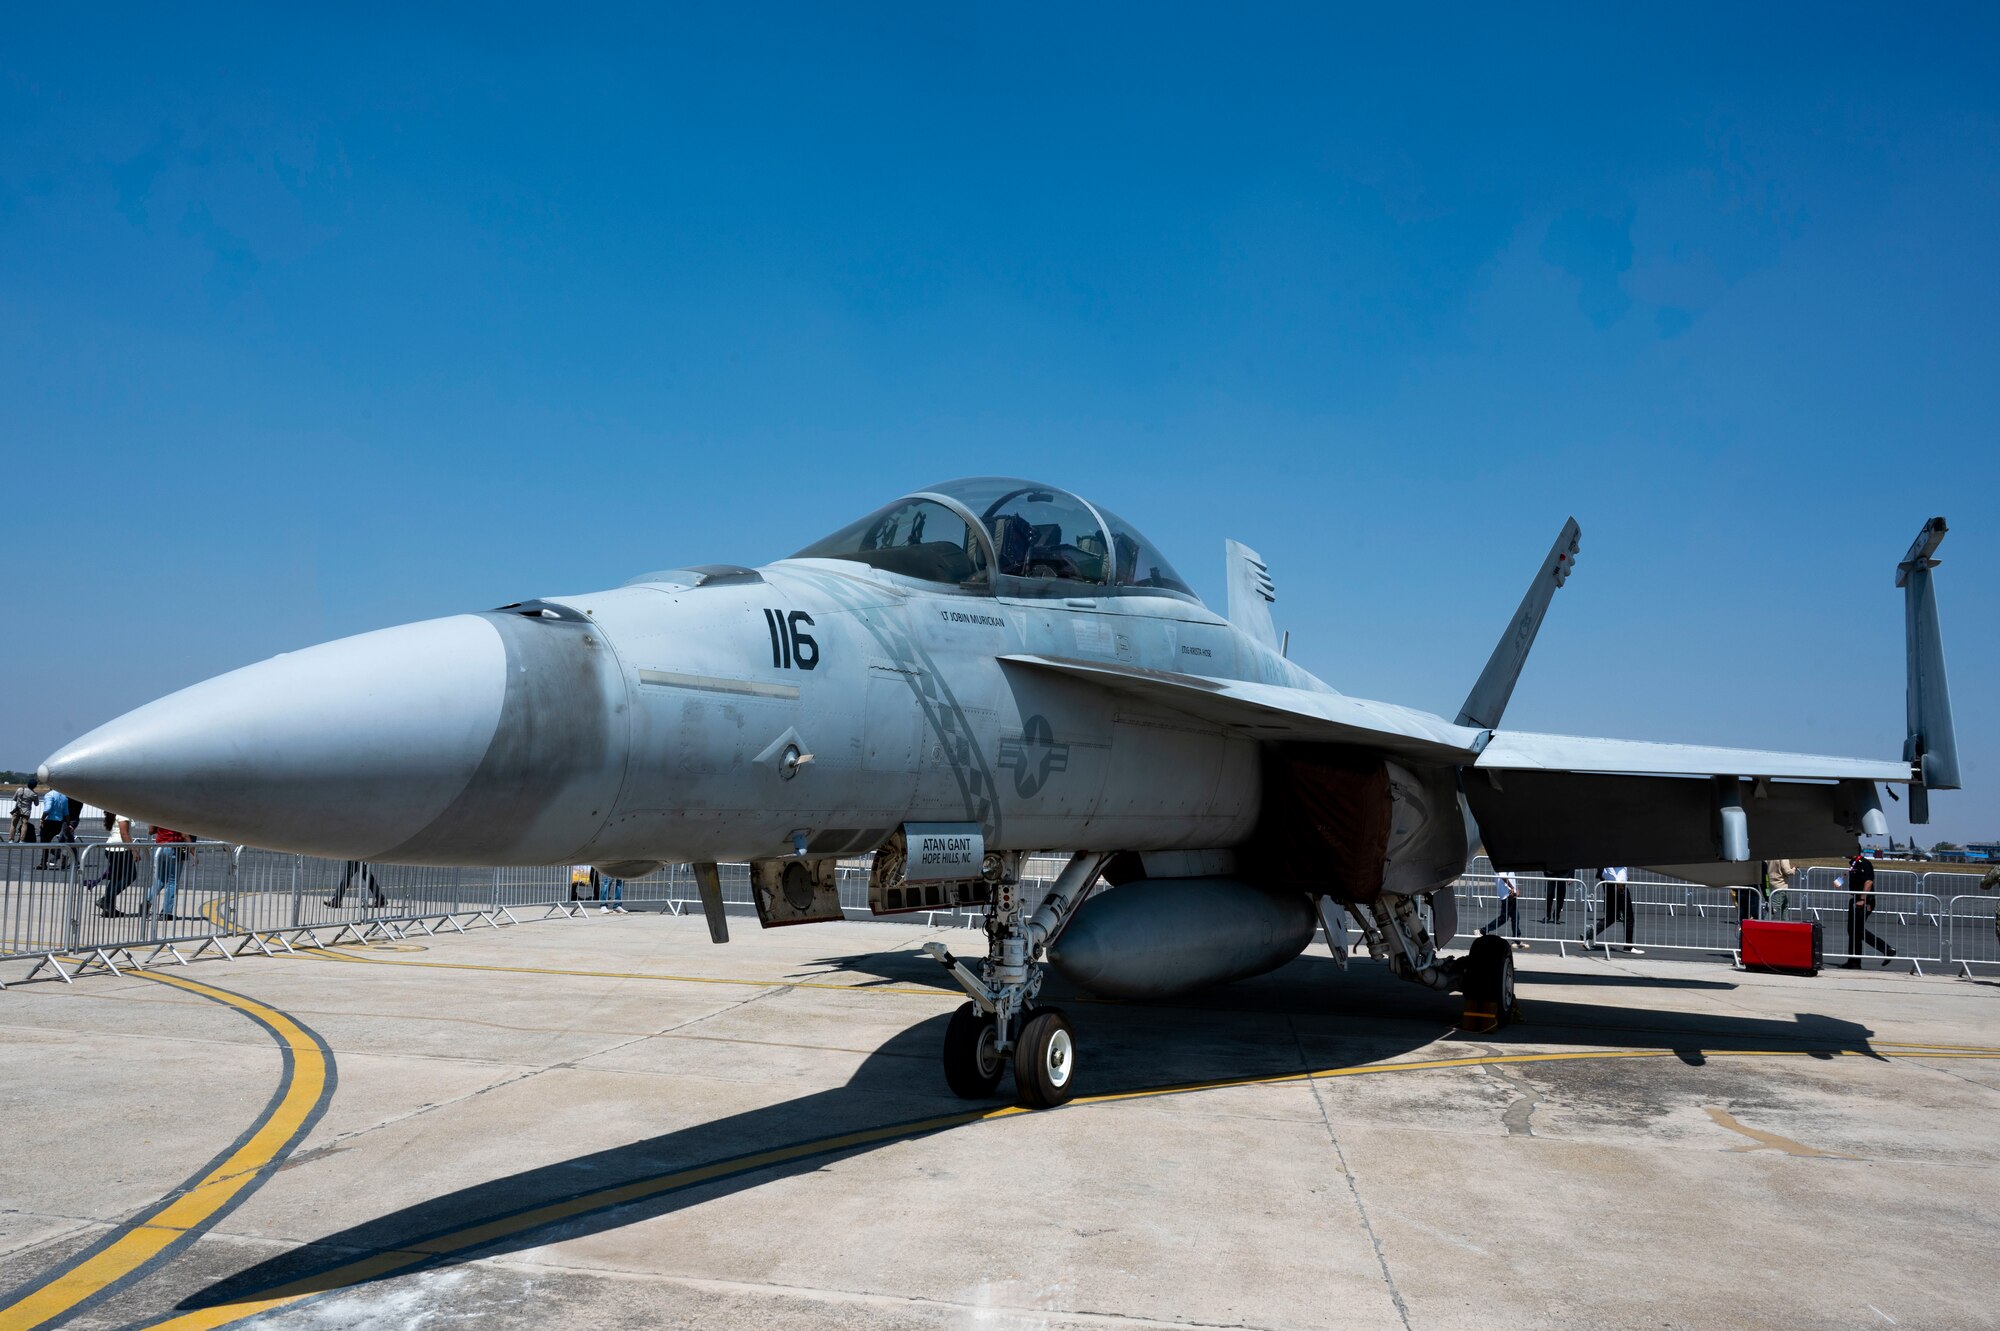 A U.S. Navy F/A-18 Super Hornet sits on display at Aero India 23